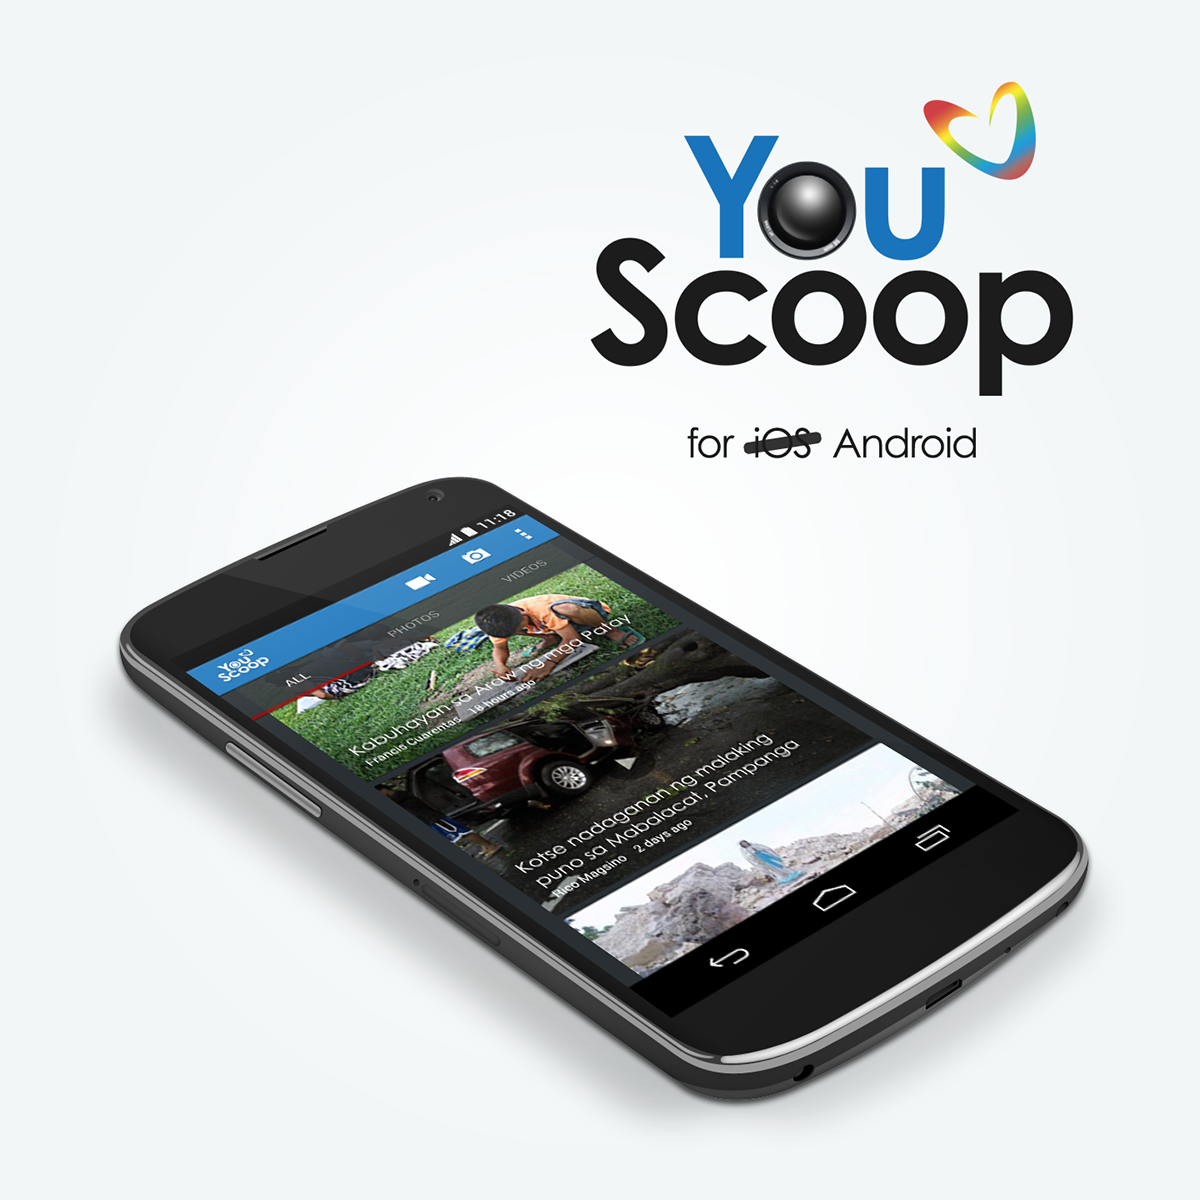 news citizen journalism android GMA News holo YouScoop photo video